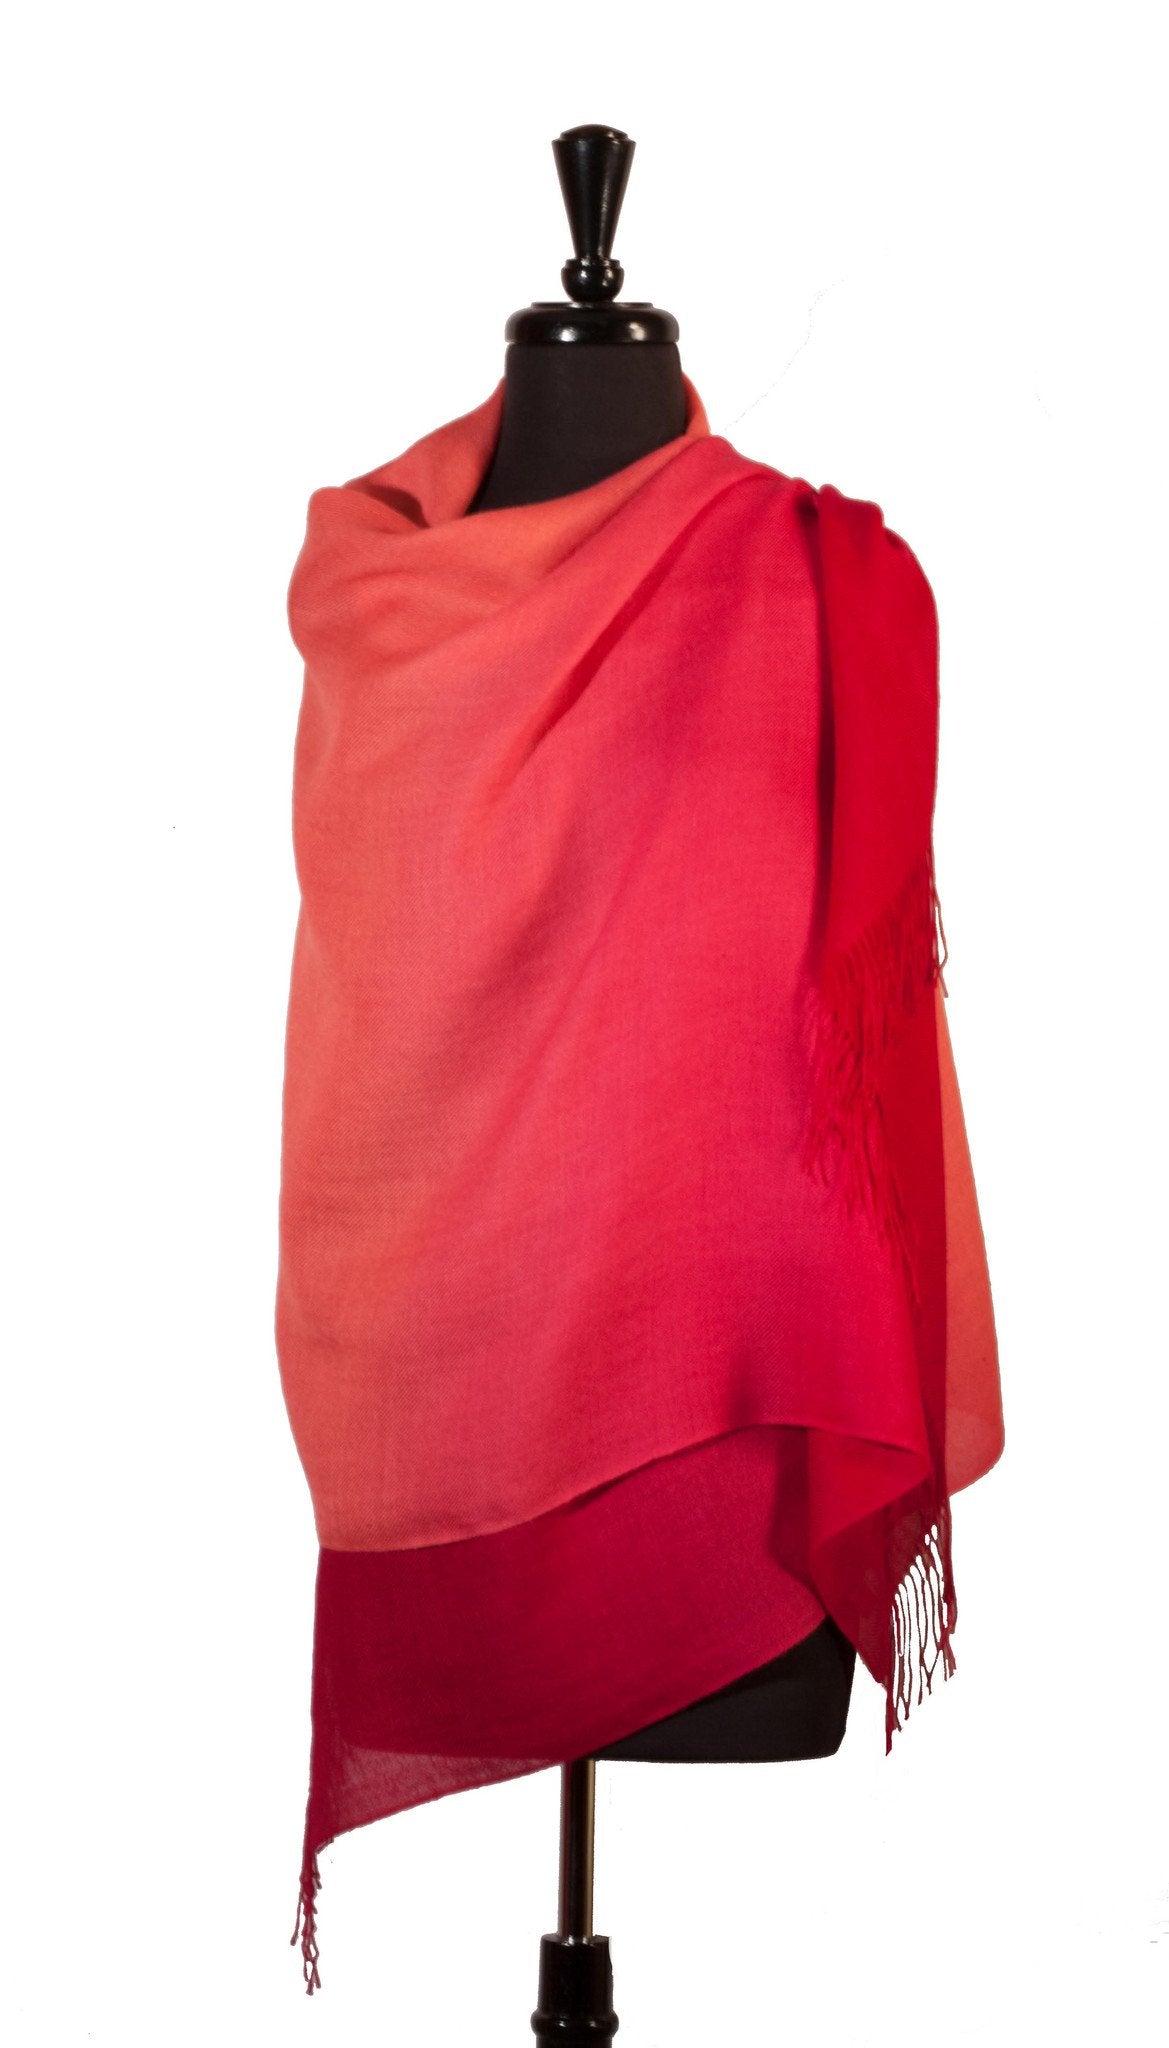 Baby Alpaca &amp; Silk Shawl Two-toned Degrade - Dip Dyed in Coral - Qinti - The Peruvian Shop